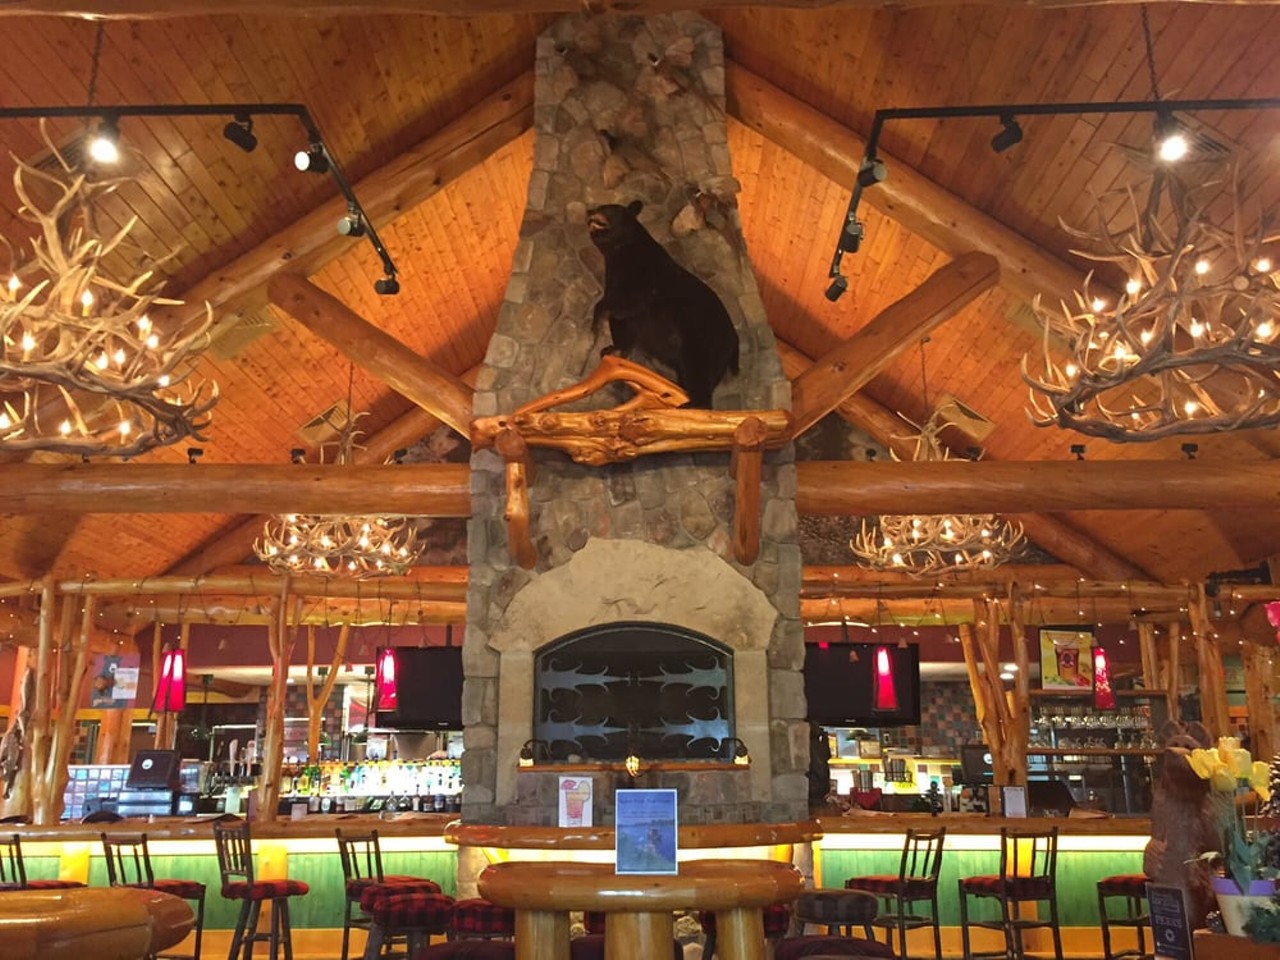 Big Bear Lodge
25253 Telegraph Rd., Brownstown Charter Twp; 734-782-6600
Fashioned as a rustic &#147;up north&#148; cabin, Big Bear lodge is a great place to gather with friends and family for smoky, filling dishes &#151; everything is cooked over an open flame. 
Photo via Yelp user Bethany E.